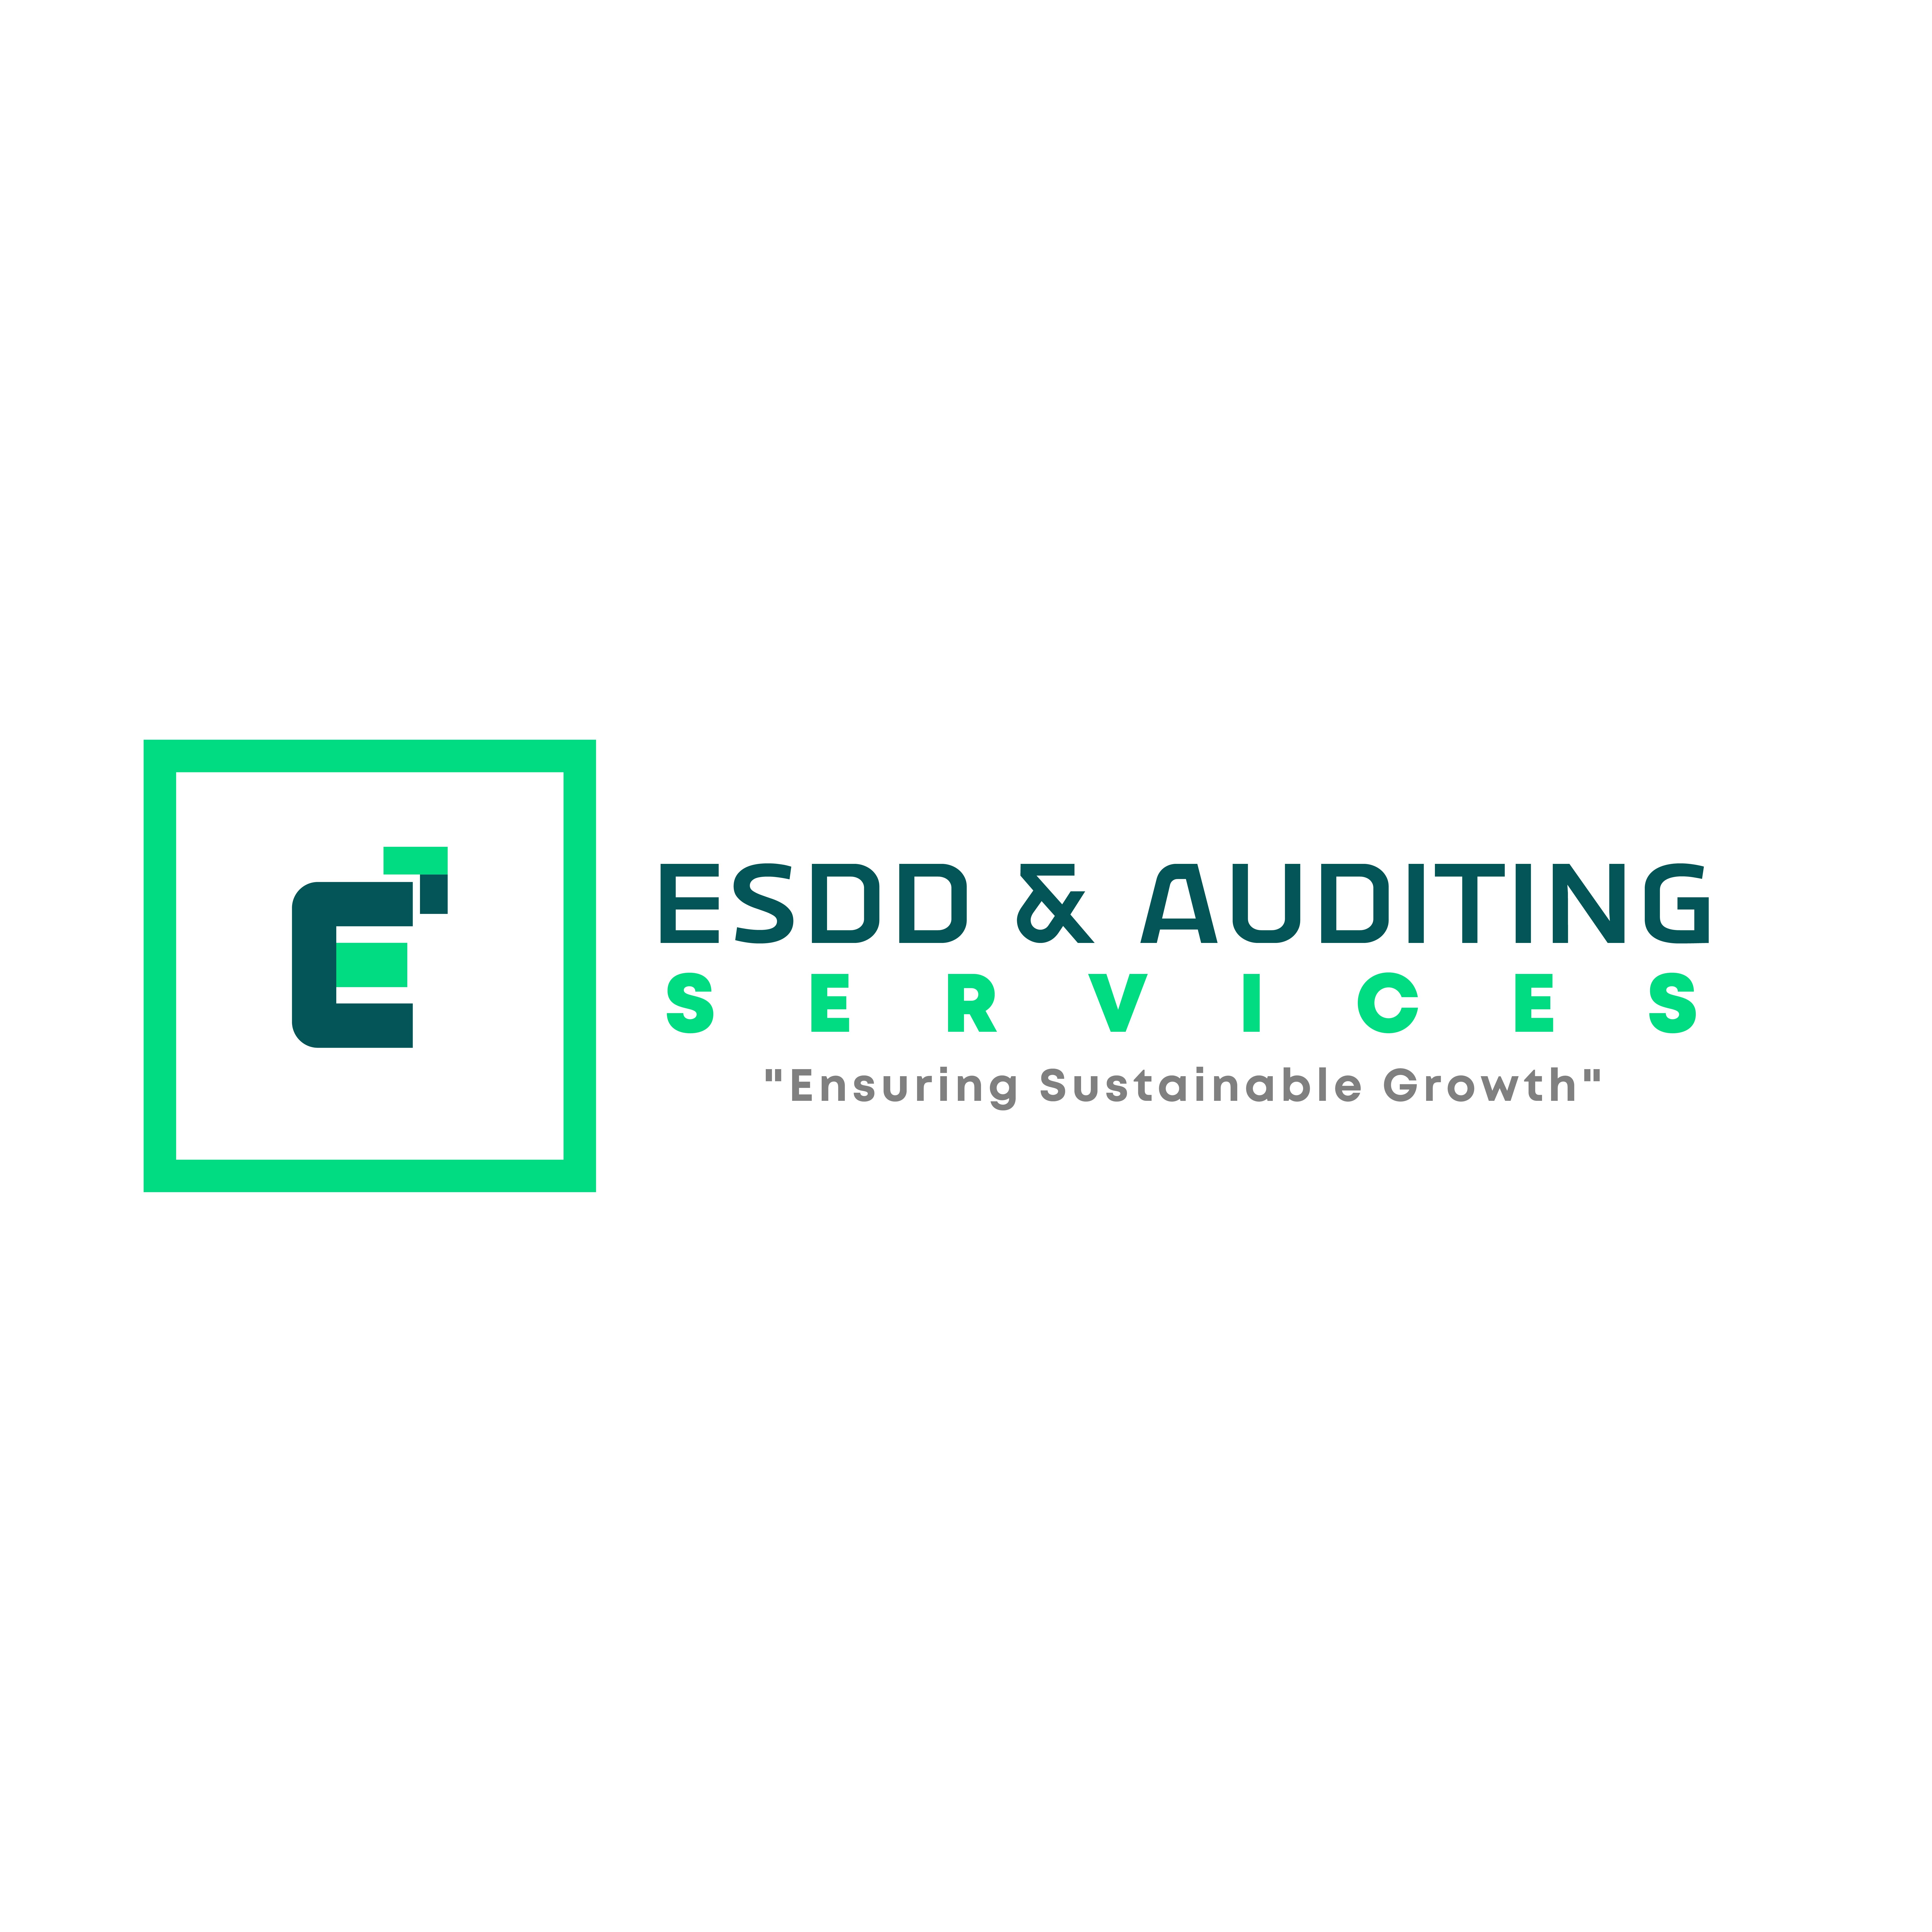 ESDD & Auditing Services